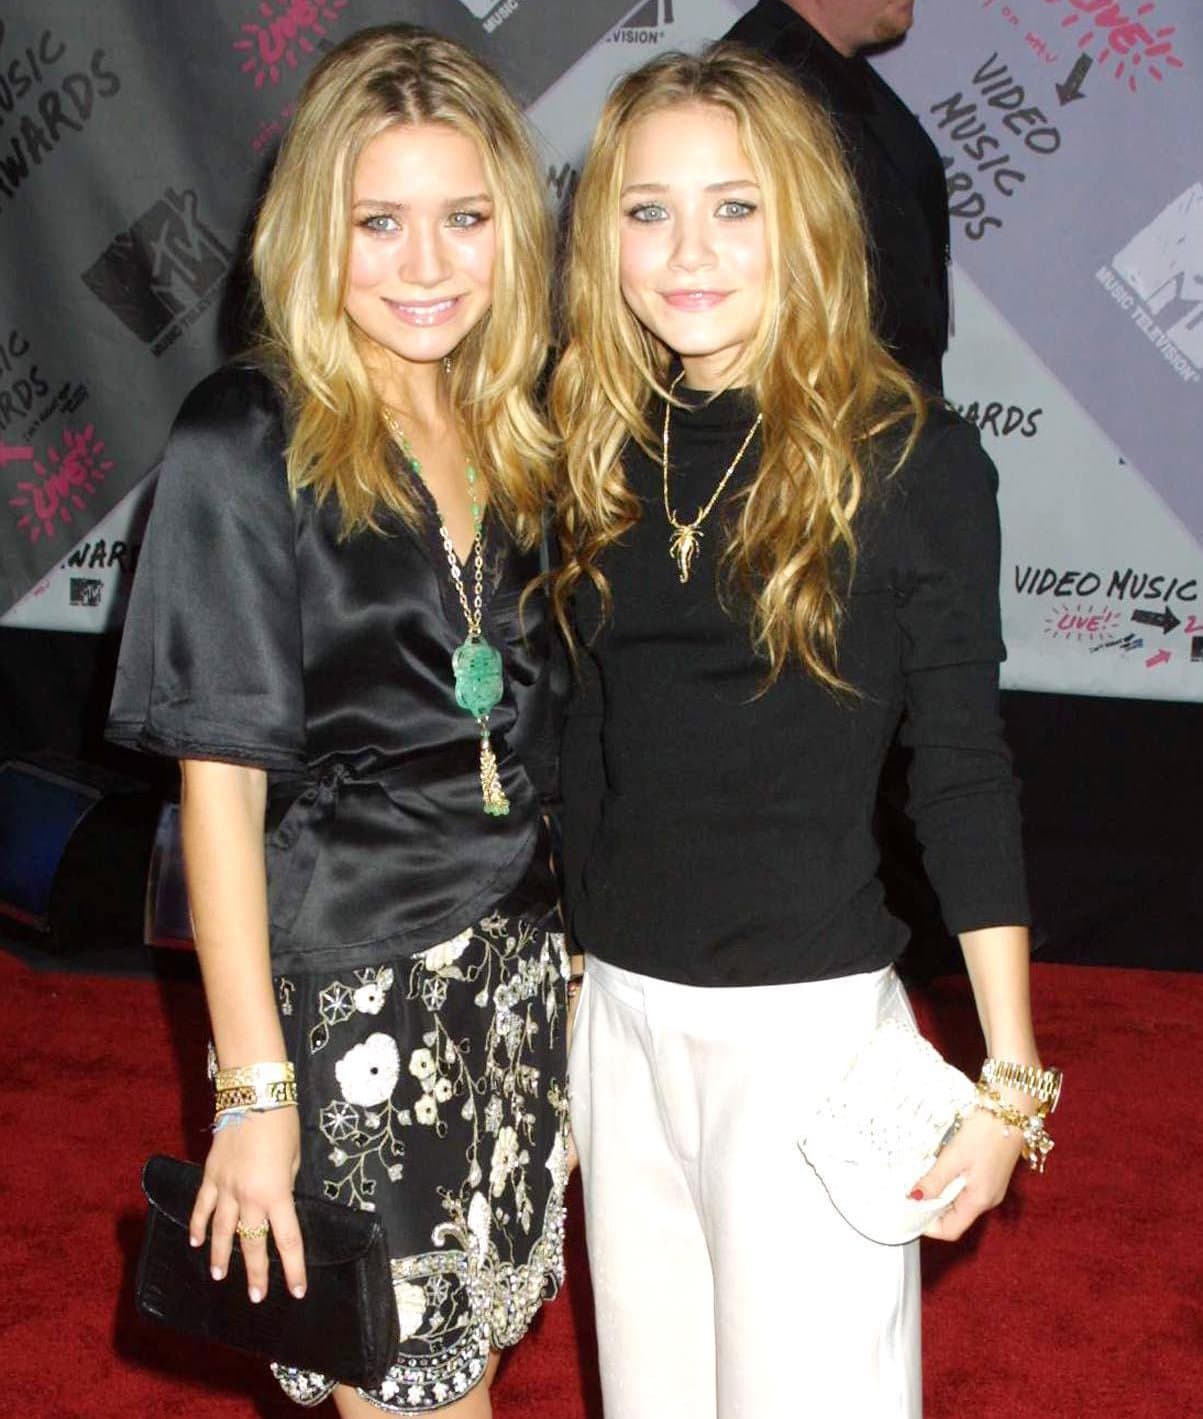 Mary-Kate and Ashley Olsen were only six months old when they were cast in the role of Michelle Tanner on ABC's Full House